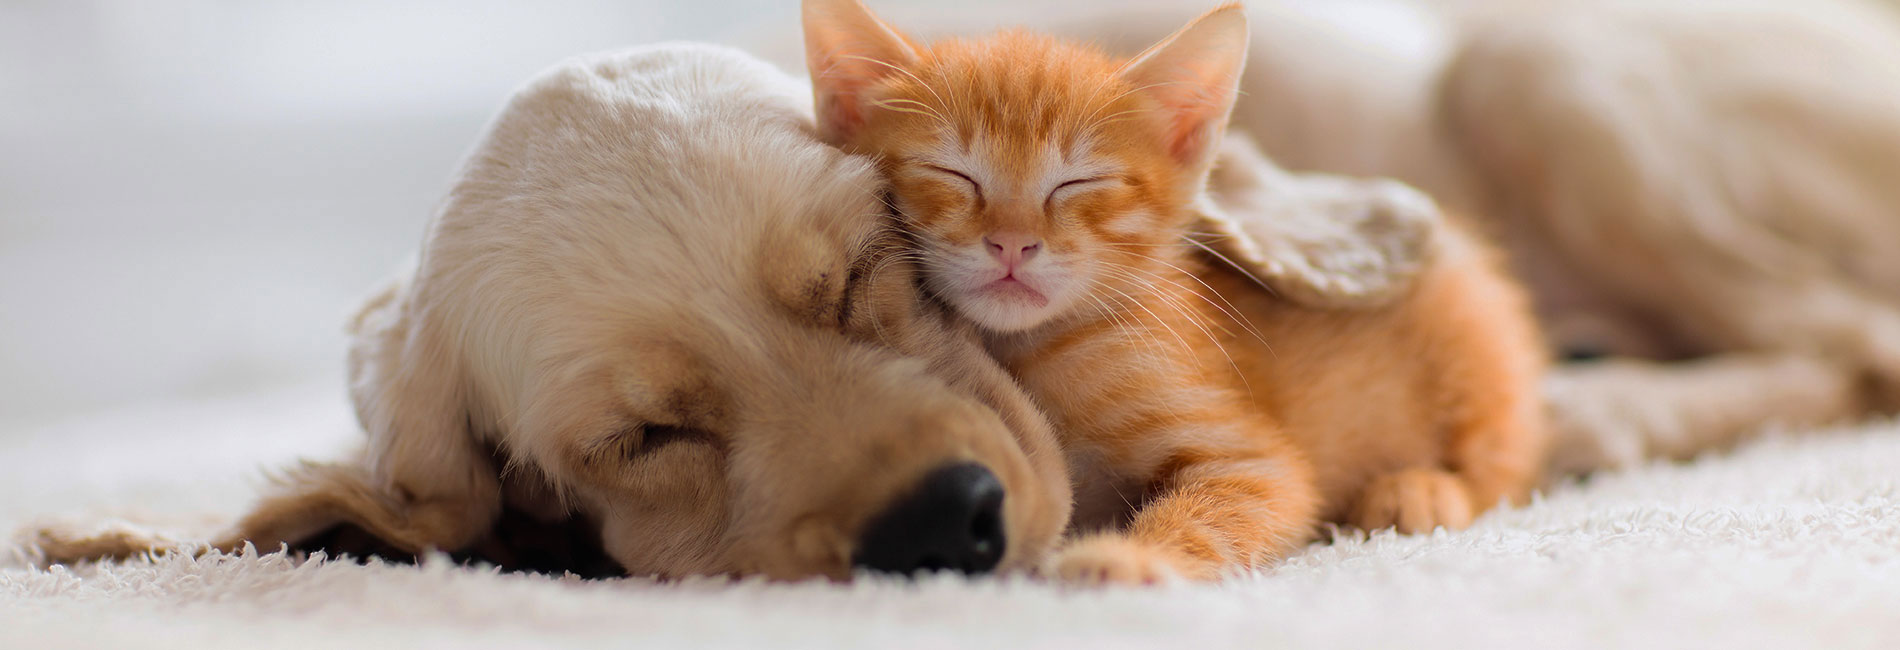 pictured kitten and dog cuddling